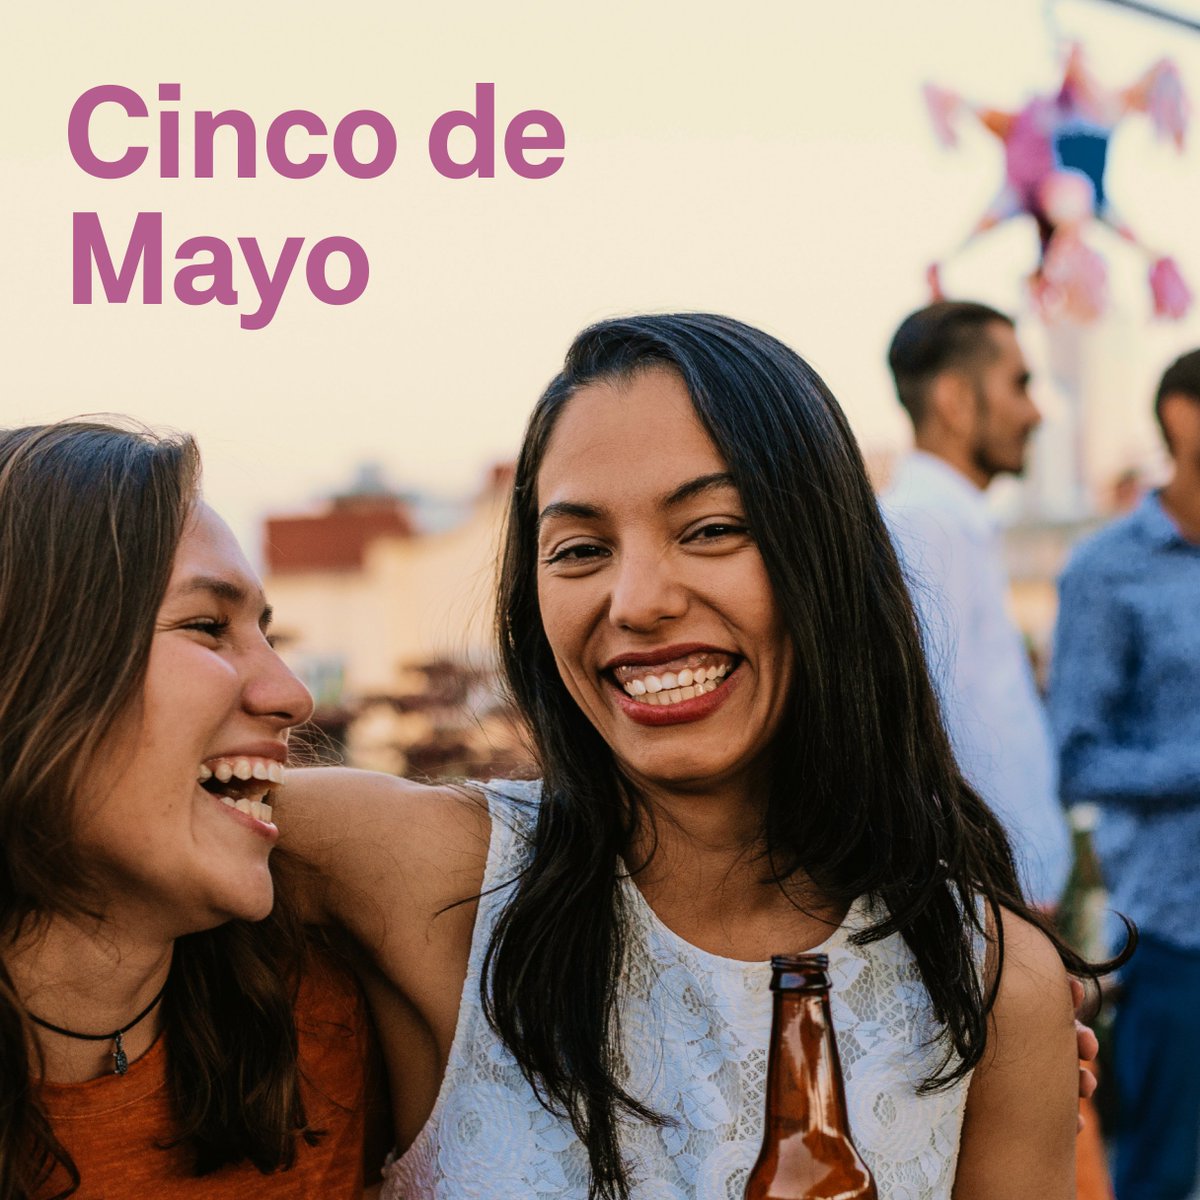 Turn up the fiesta vibes! 🎵 Schedule our Cinco de Mayo playlist and guarantee vibrant celebrations, with everything from Mexican classics to the latest in reggaeton. Find it here: bit.ly/4djIuRj #MusicforBusiness #SoundtrackYourBrand